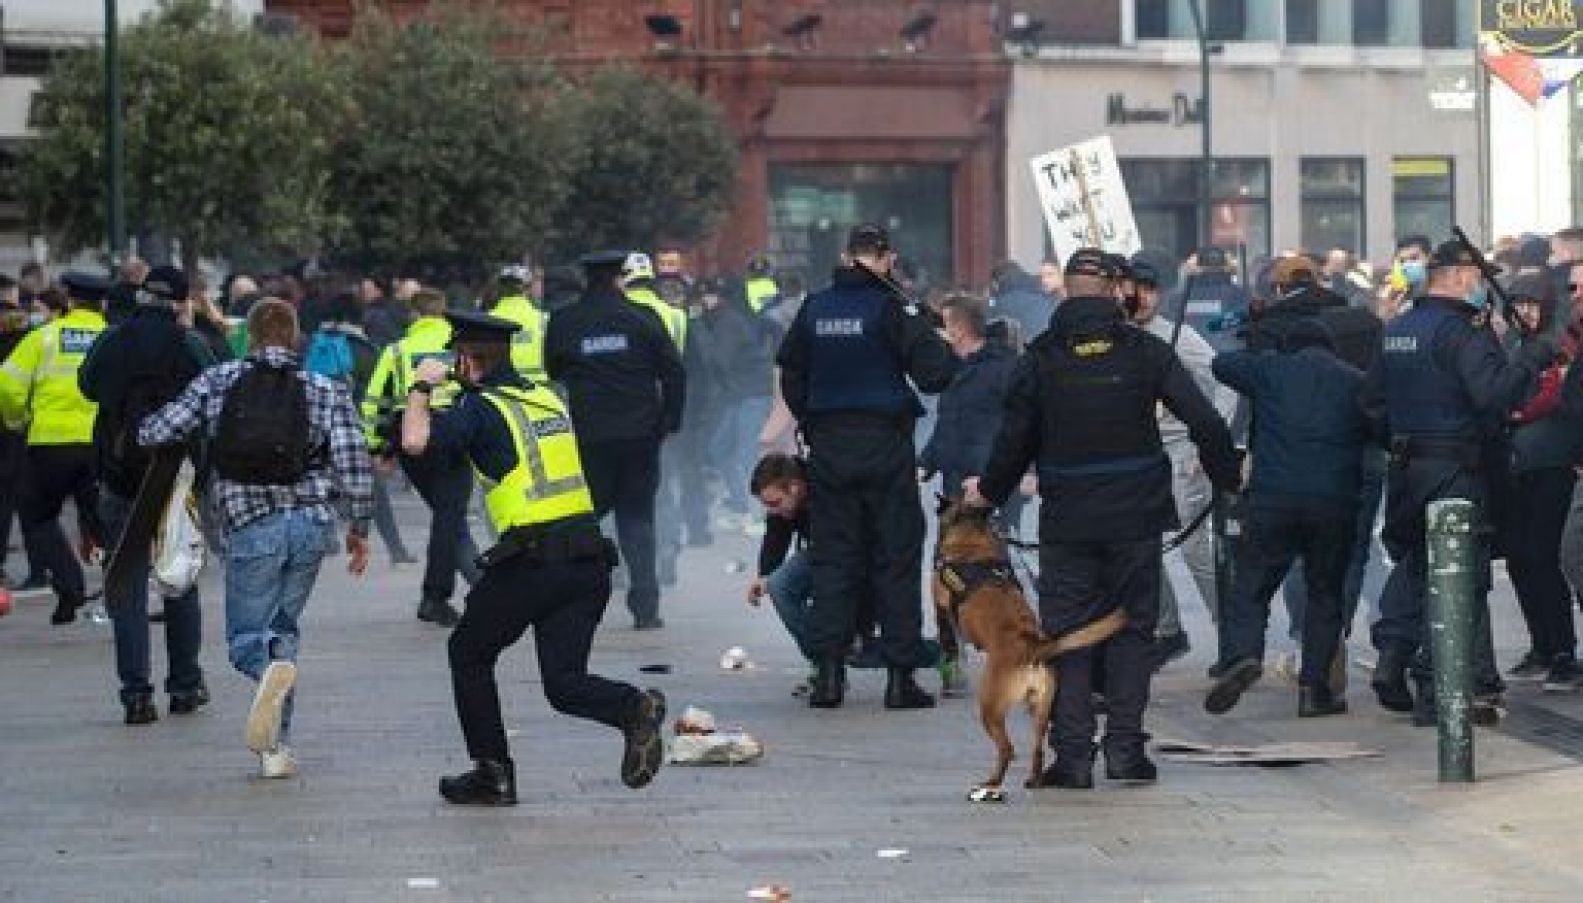 Protesters And Gardai Clashing During An Anti-Lockdown Protest In Dublin City Centre.